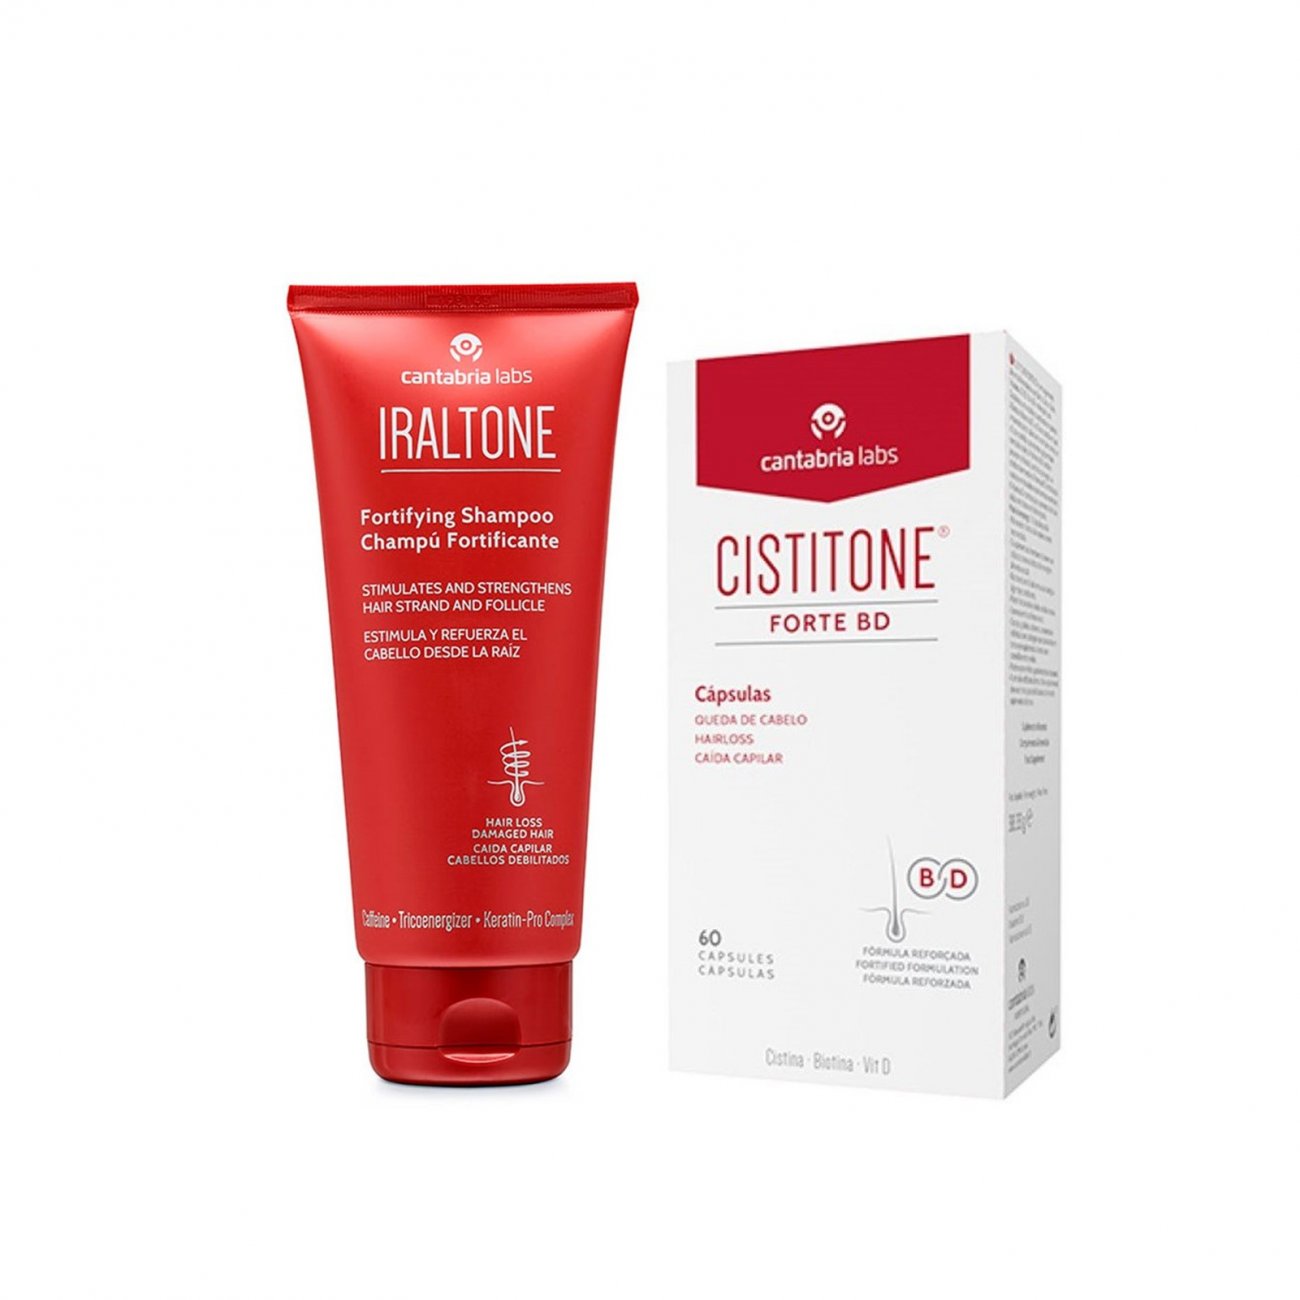 PROMOTIONAL PACK:Cistitone Forte BD Hair Loss Capsules x60 + Fortifying Shampoo 200ml